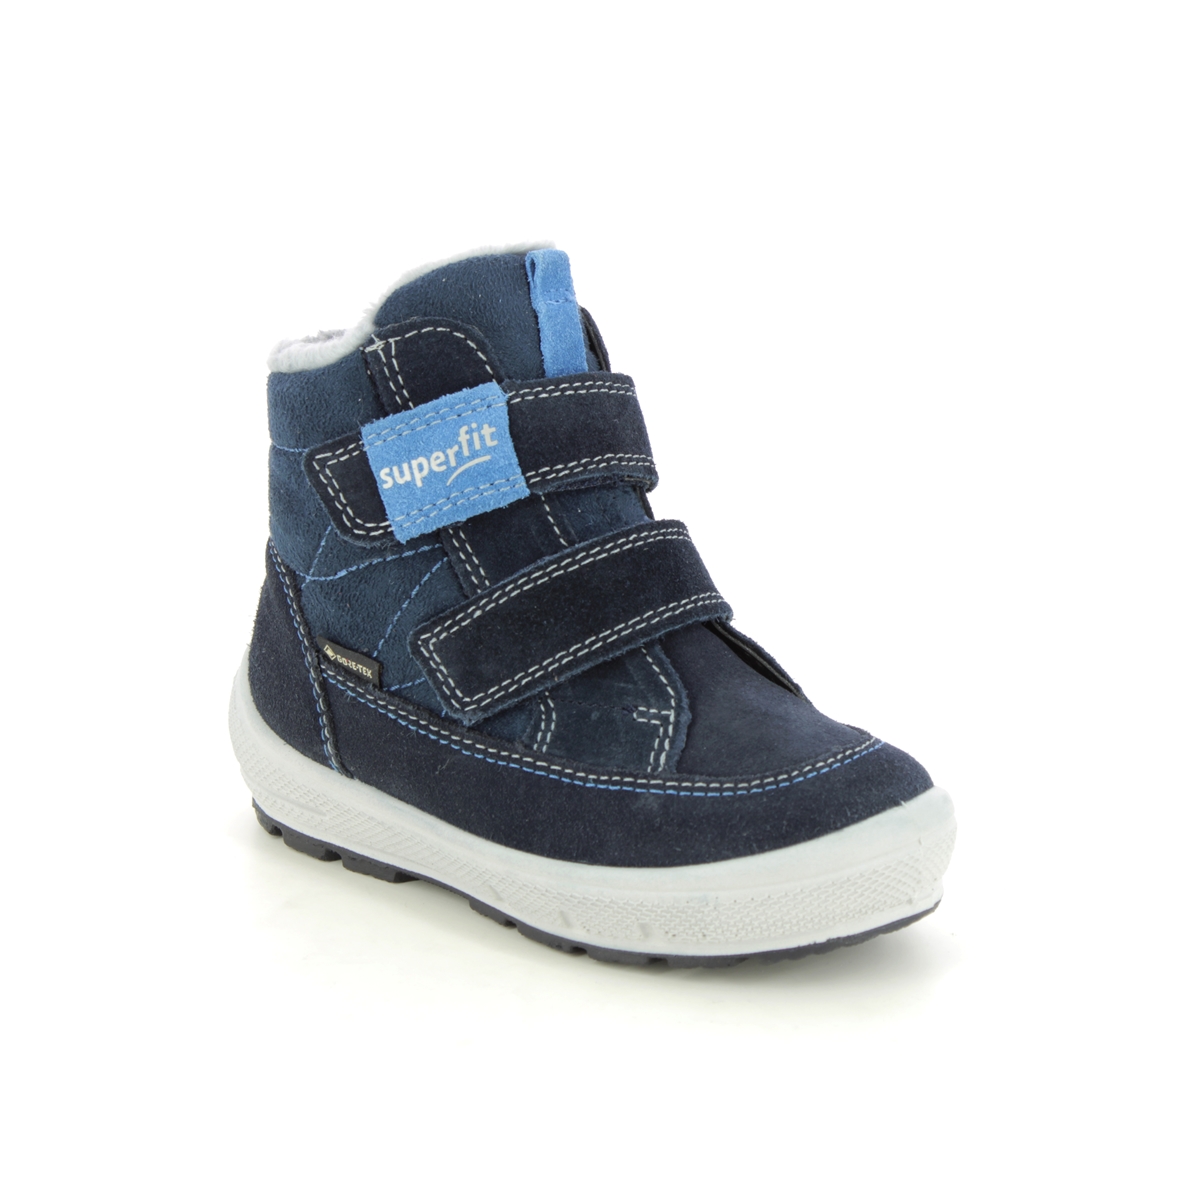 Superfit Groovy Gtx Navy Kids Toddler Boys Boots 1009314-8000 In Size 28 In Plain Navy